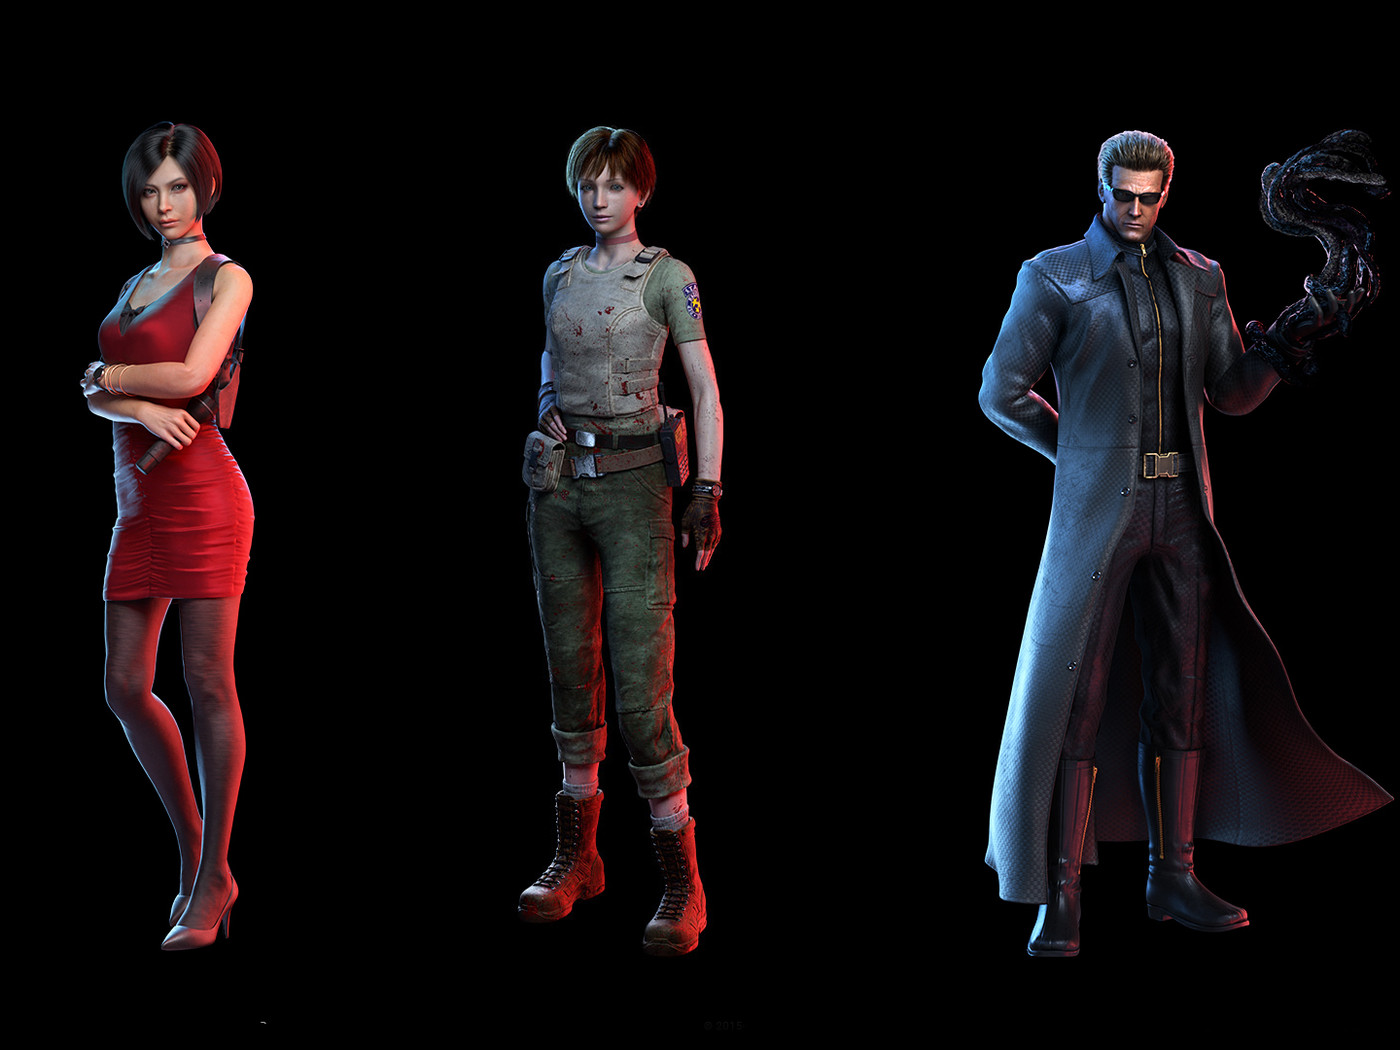 Dead by Daylight adds Resident Evil's Wesker, Ada, and Rebecca